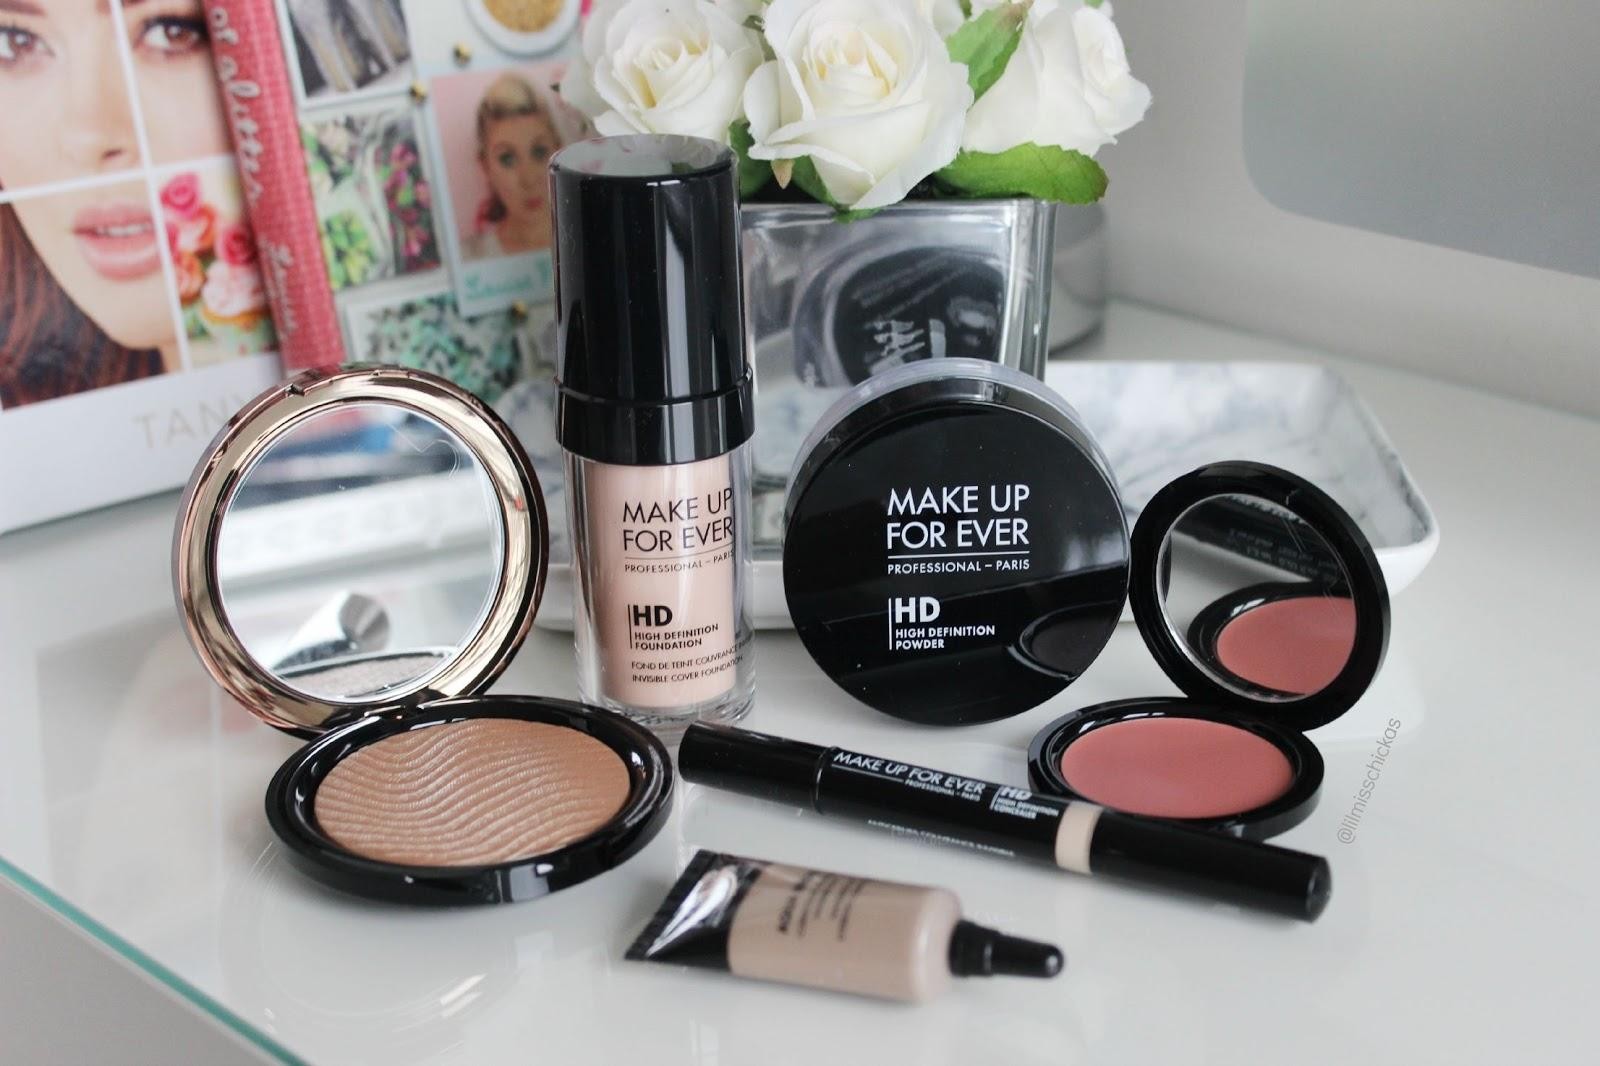 a picture of Make Up For Ever products